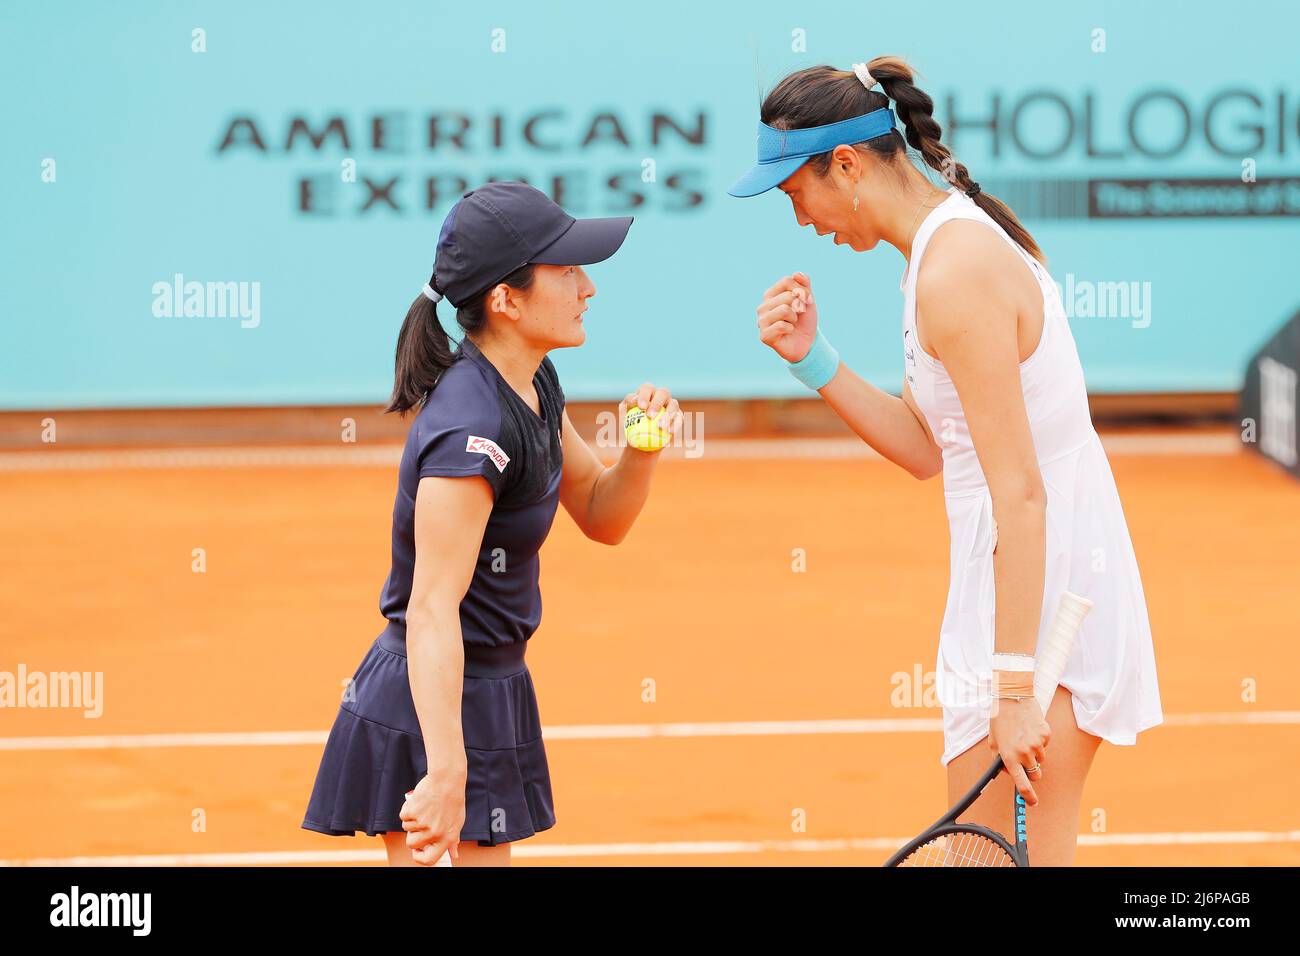 Madrid, Spain, MAY 3, 2022 - (L-R) Shuko Aoyama (JPN), Hao-Ching Chan  (TPE), MAY 3, 2022 - Tennis : Aoyama and Chan during Doubles 2nd round  match against Cornet and Tomljanovic on